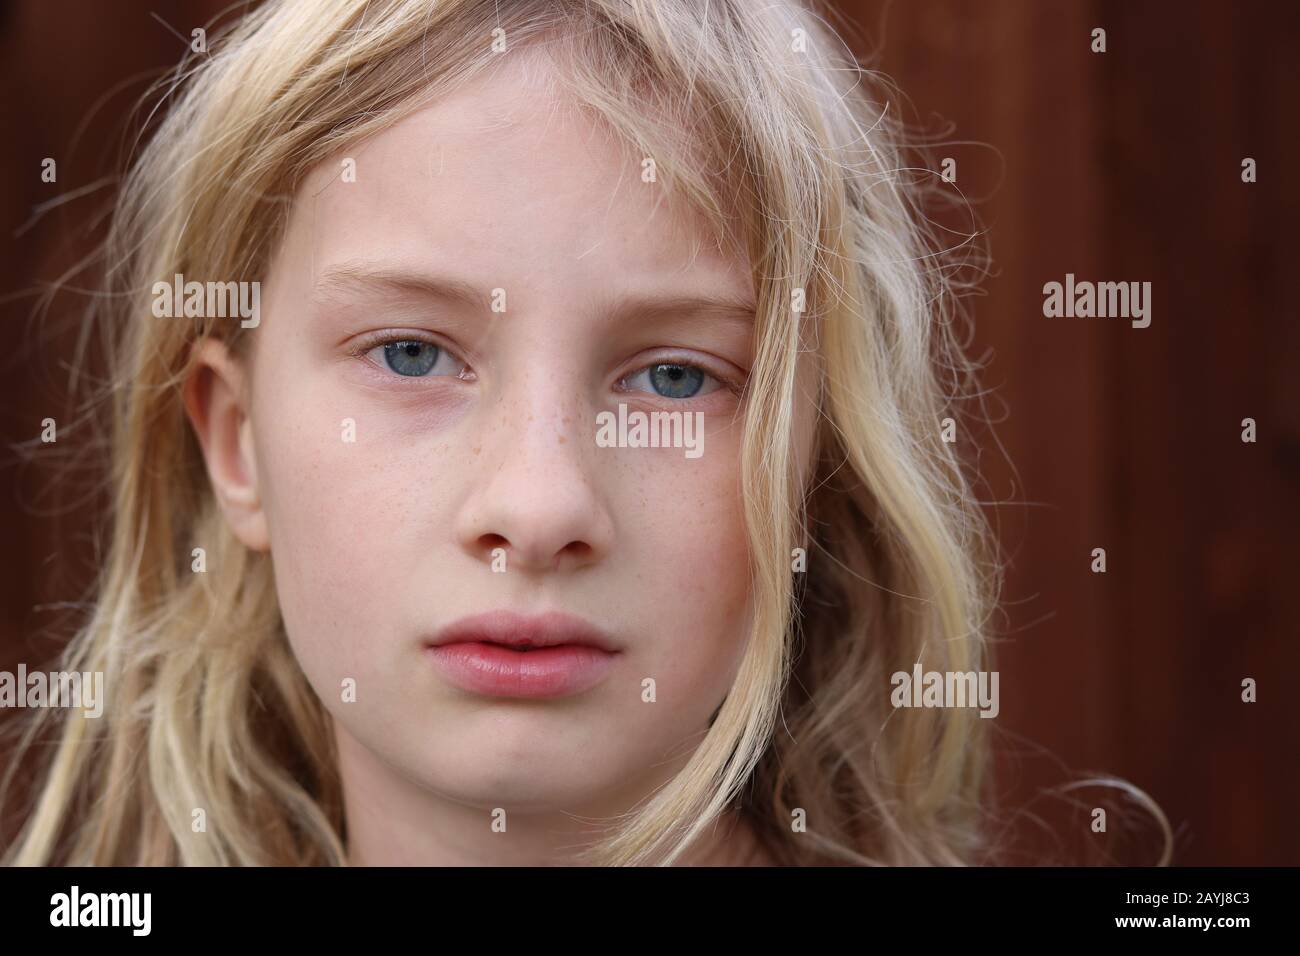 Portrait of a young teenage girl with a serious stare Stock Photo